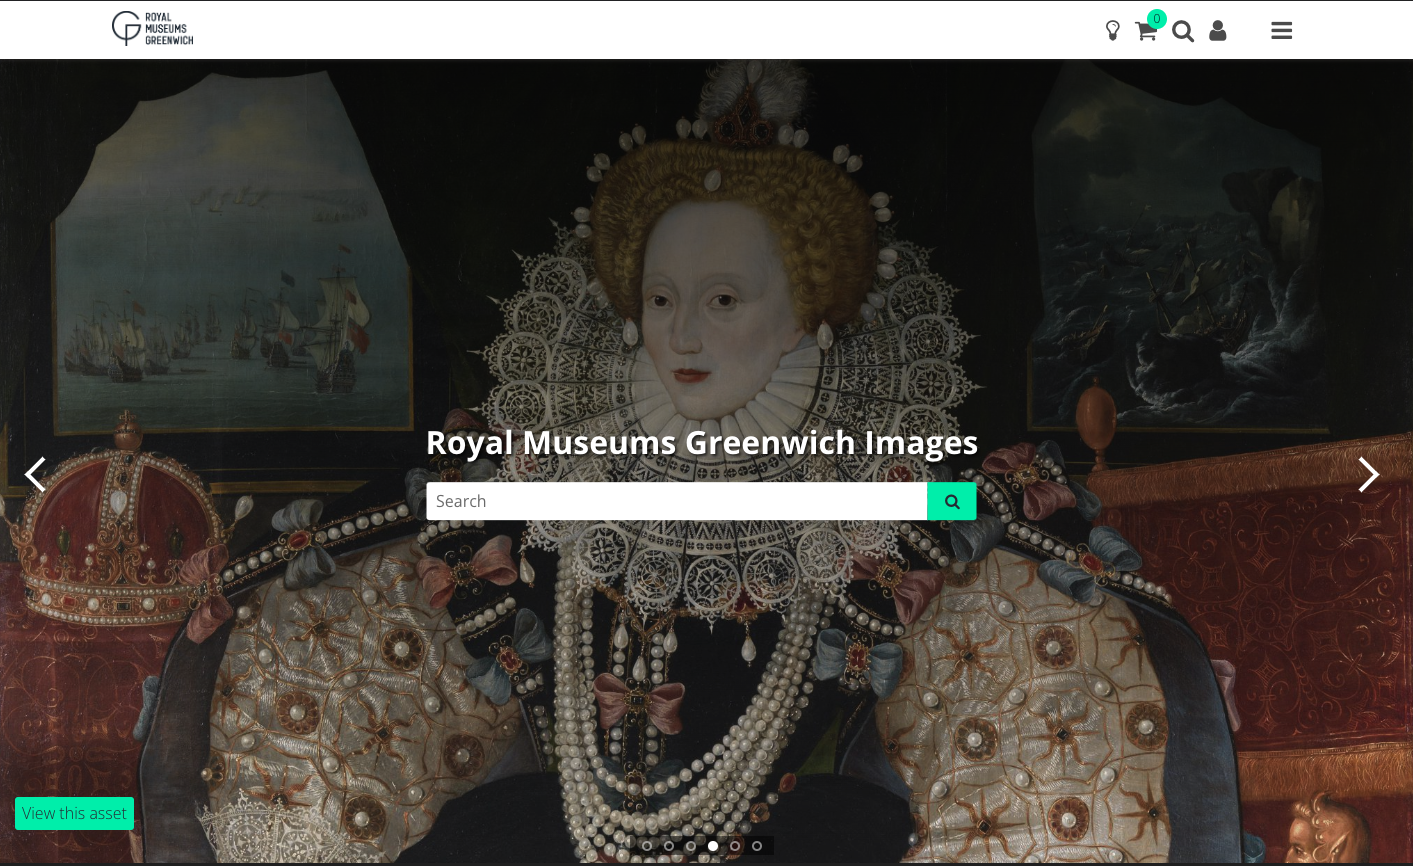 Royal Museums Greenwich works with Capture Ltd to refresh its image library